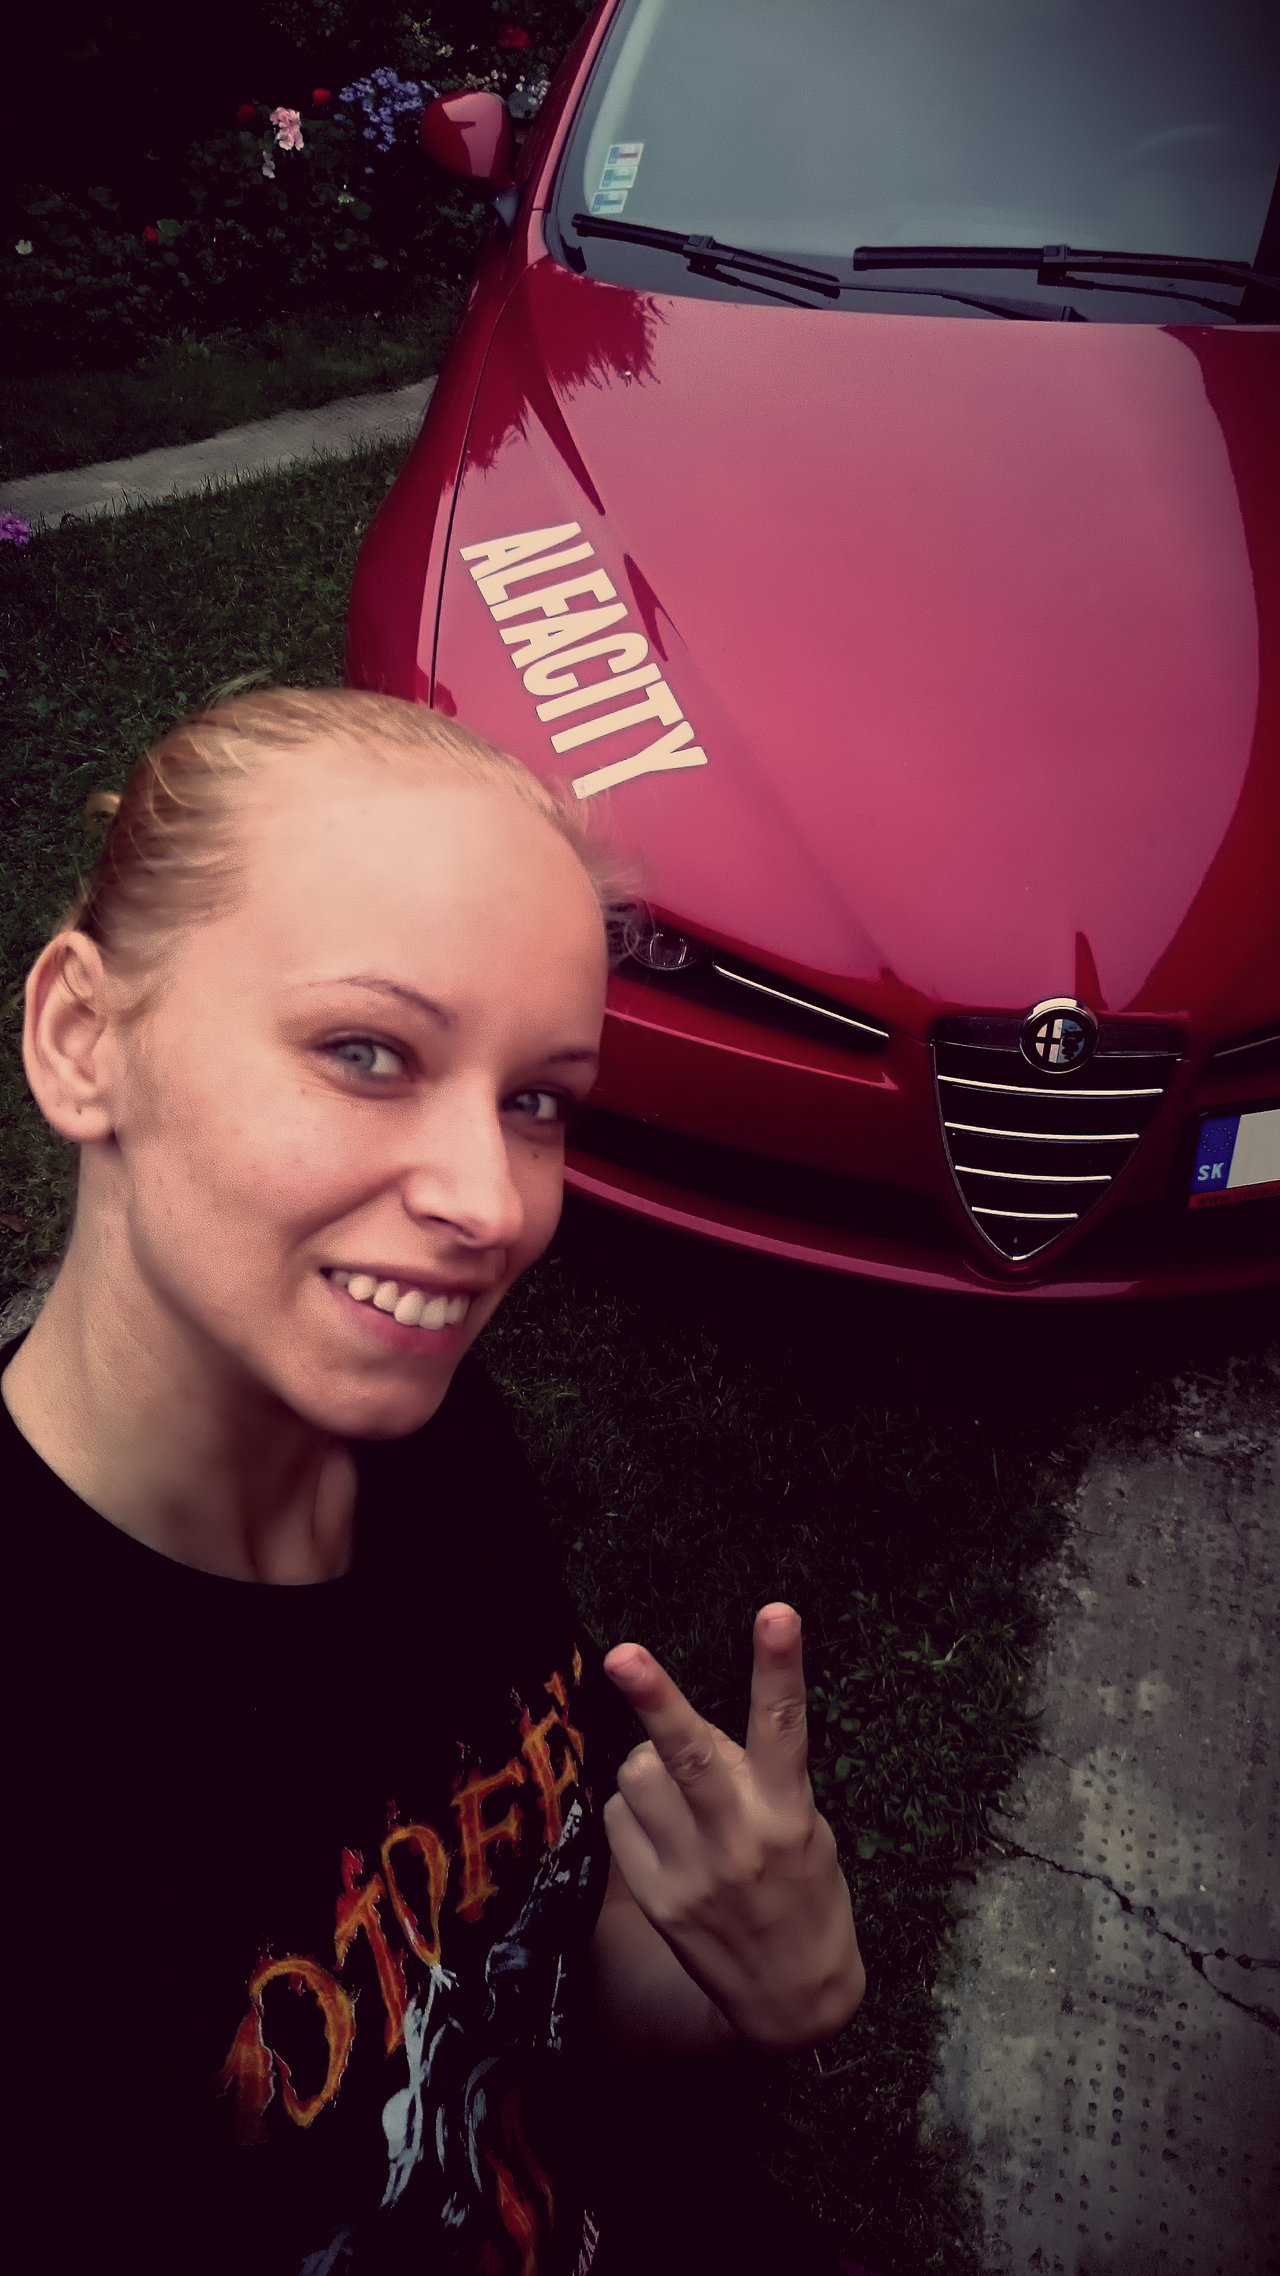 In a relationship with my Alfa Romeo :)